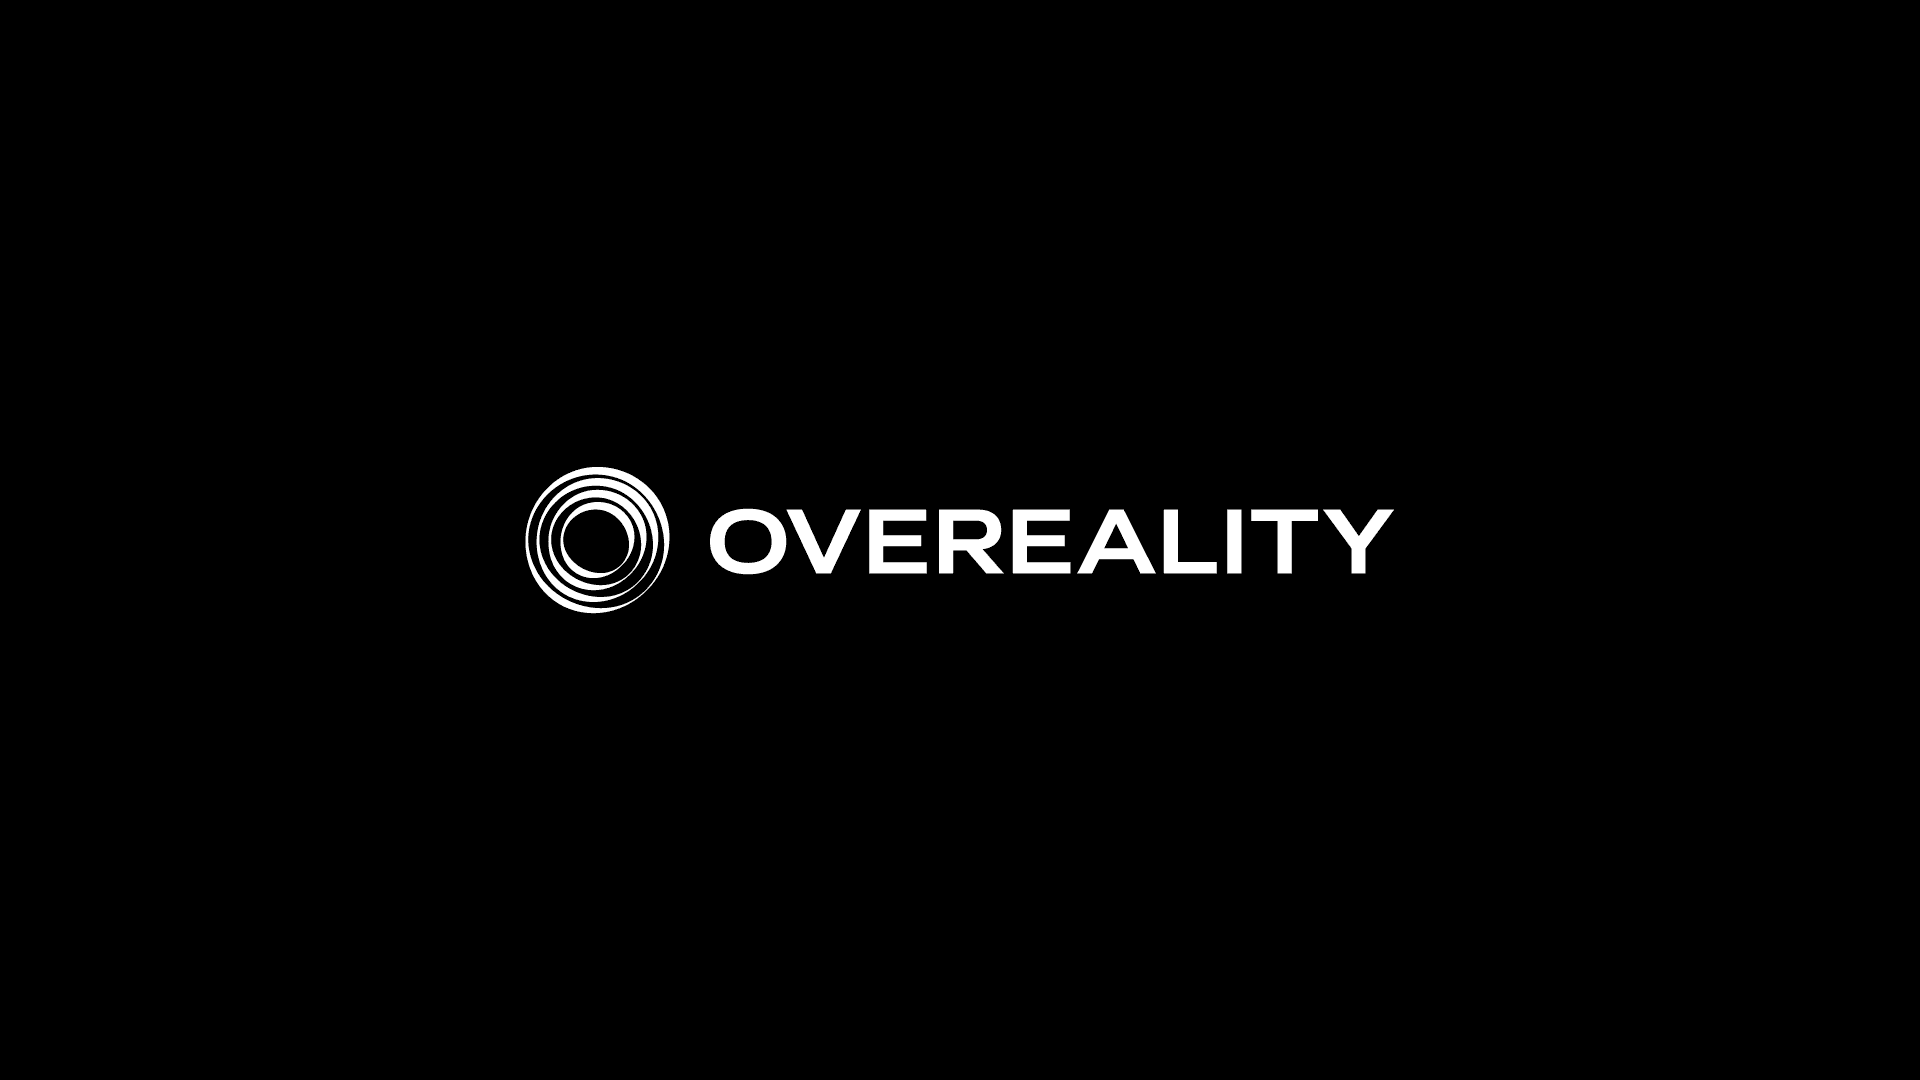 Overeality logo - 3 ringed circle with gradient next to word OVEREALITY